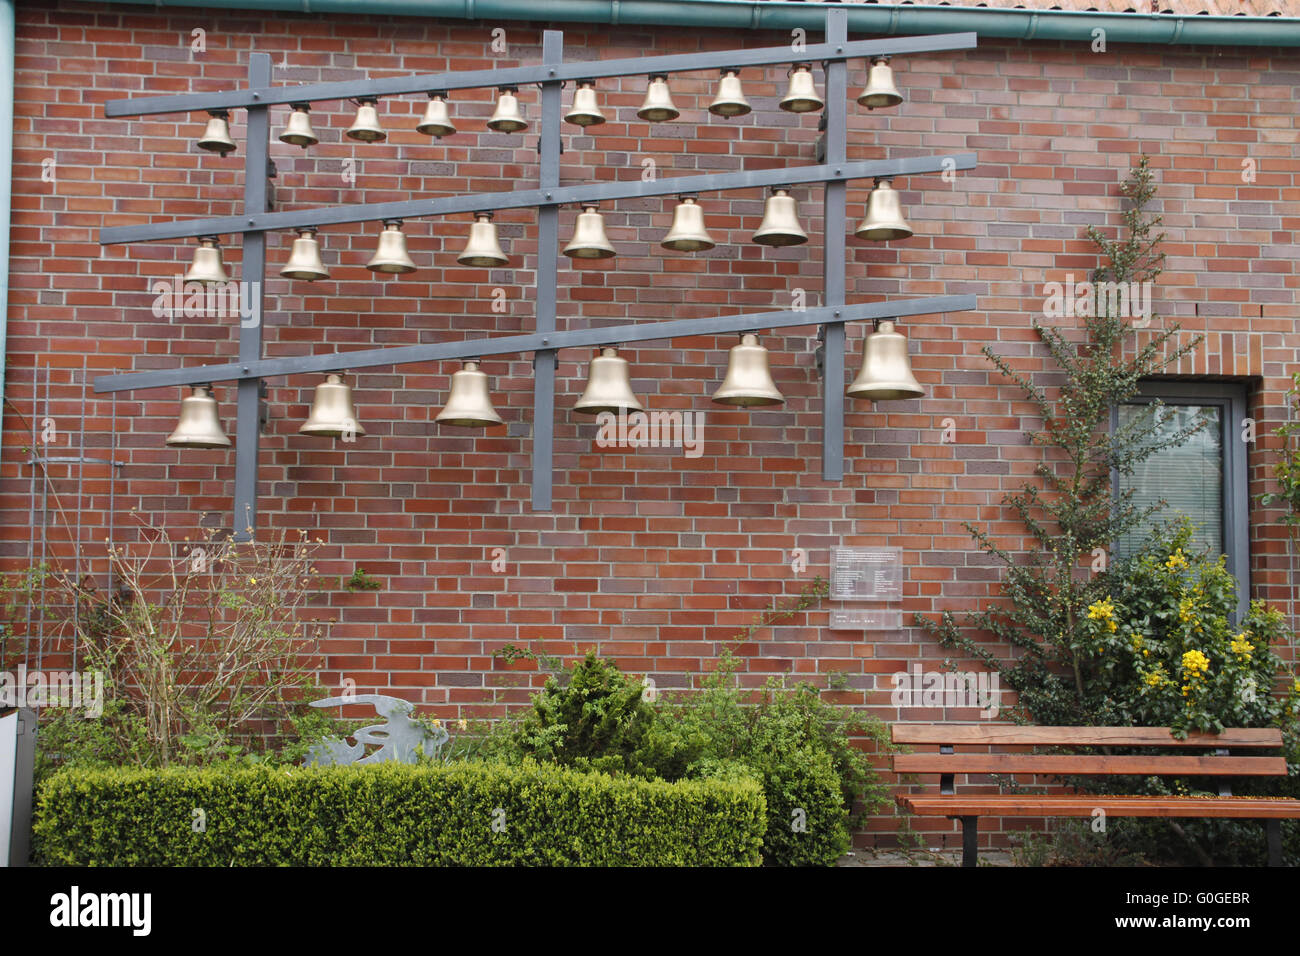 chime of bells, Buxtehude, Germany Stock Photo